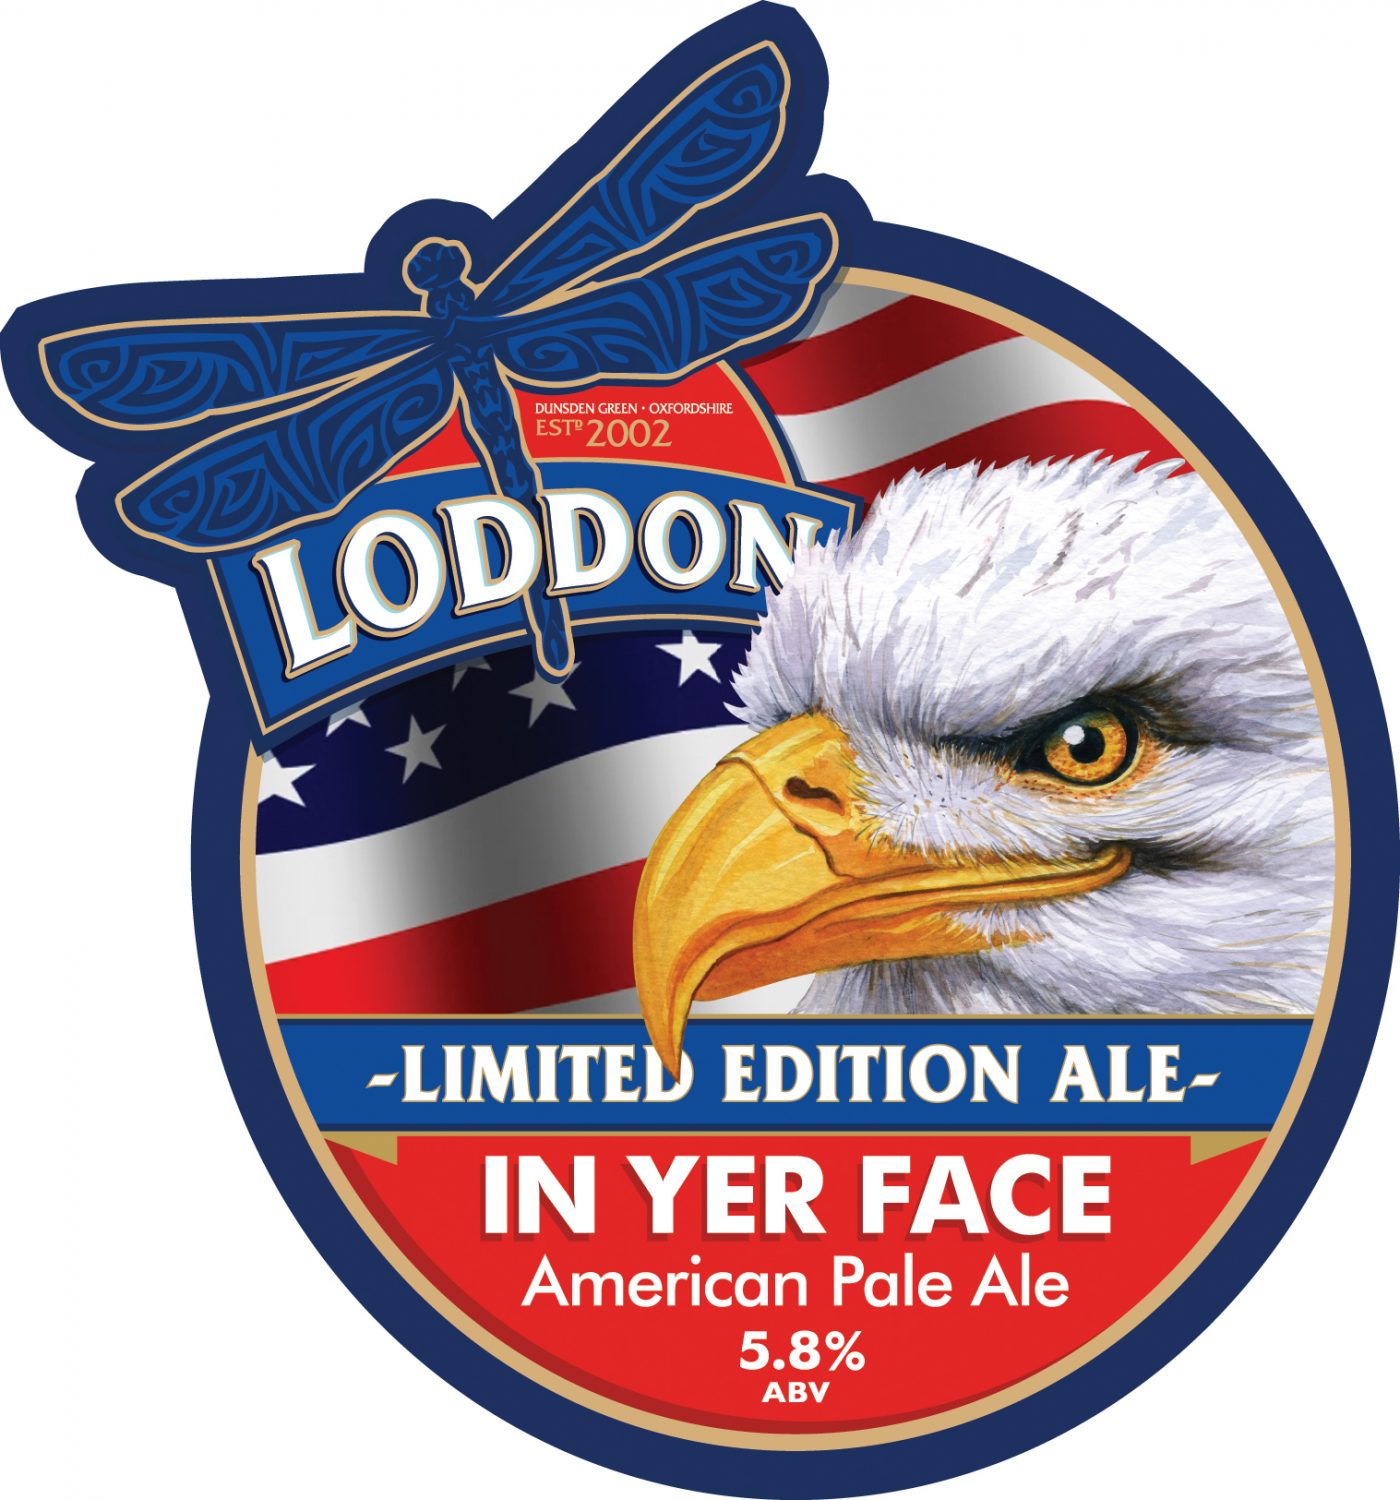 Loddon Brewery Limited Edition Ale - In Yer Face